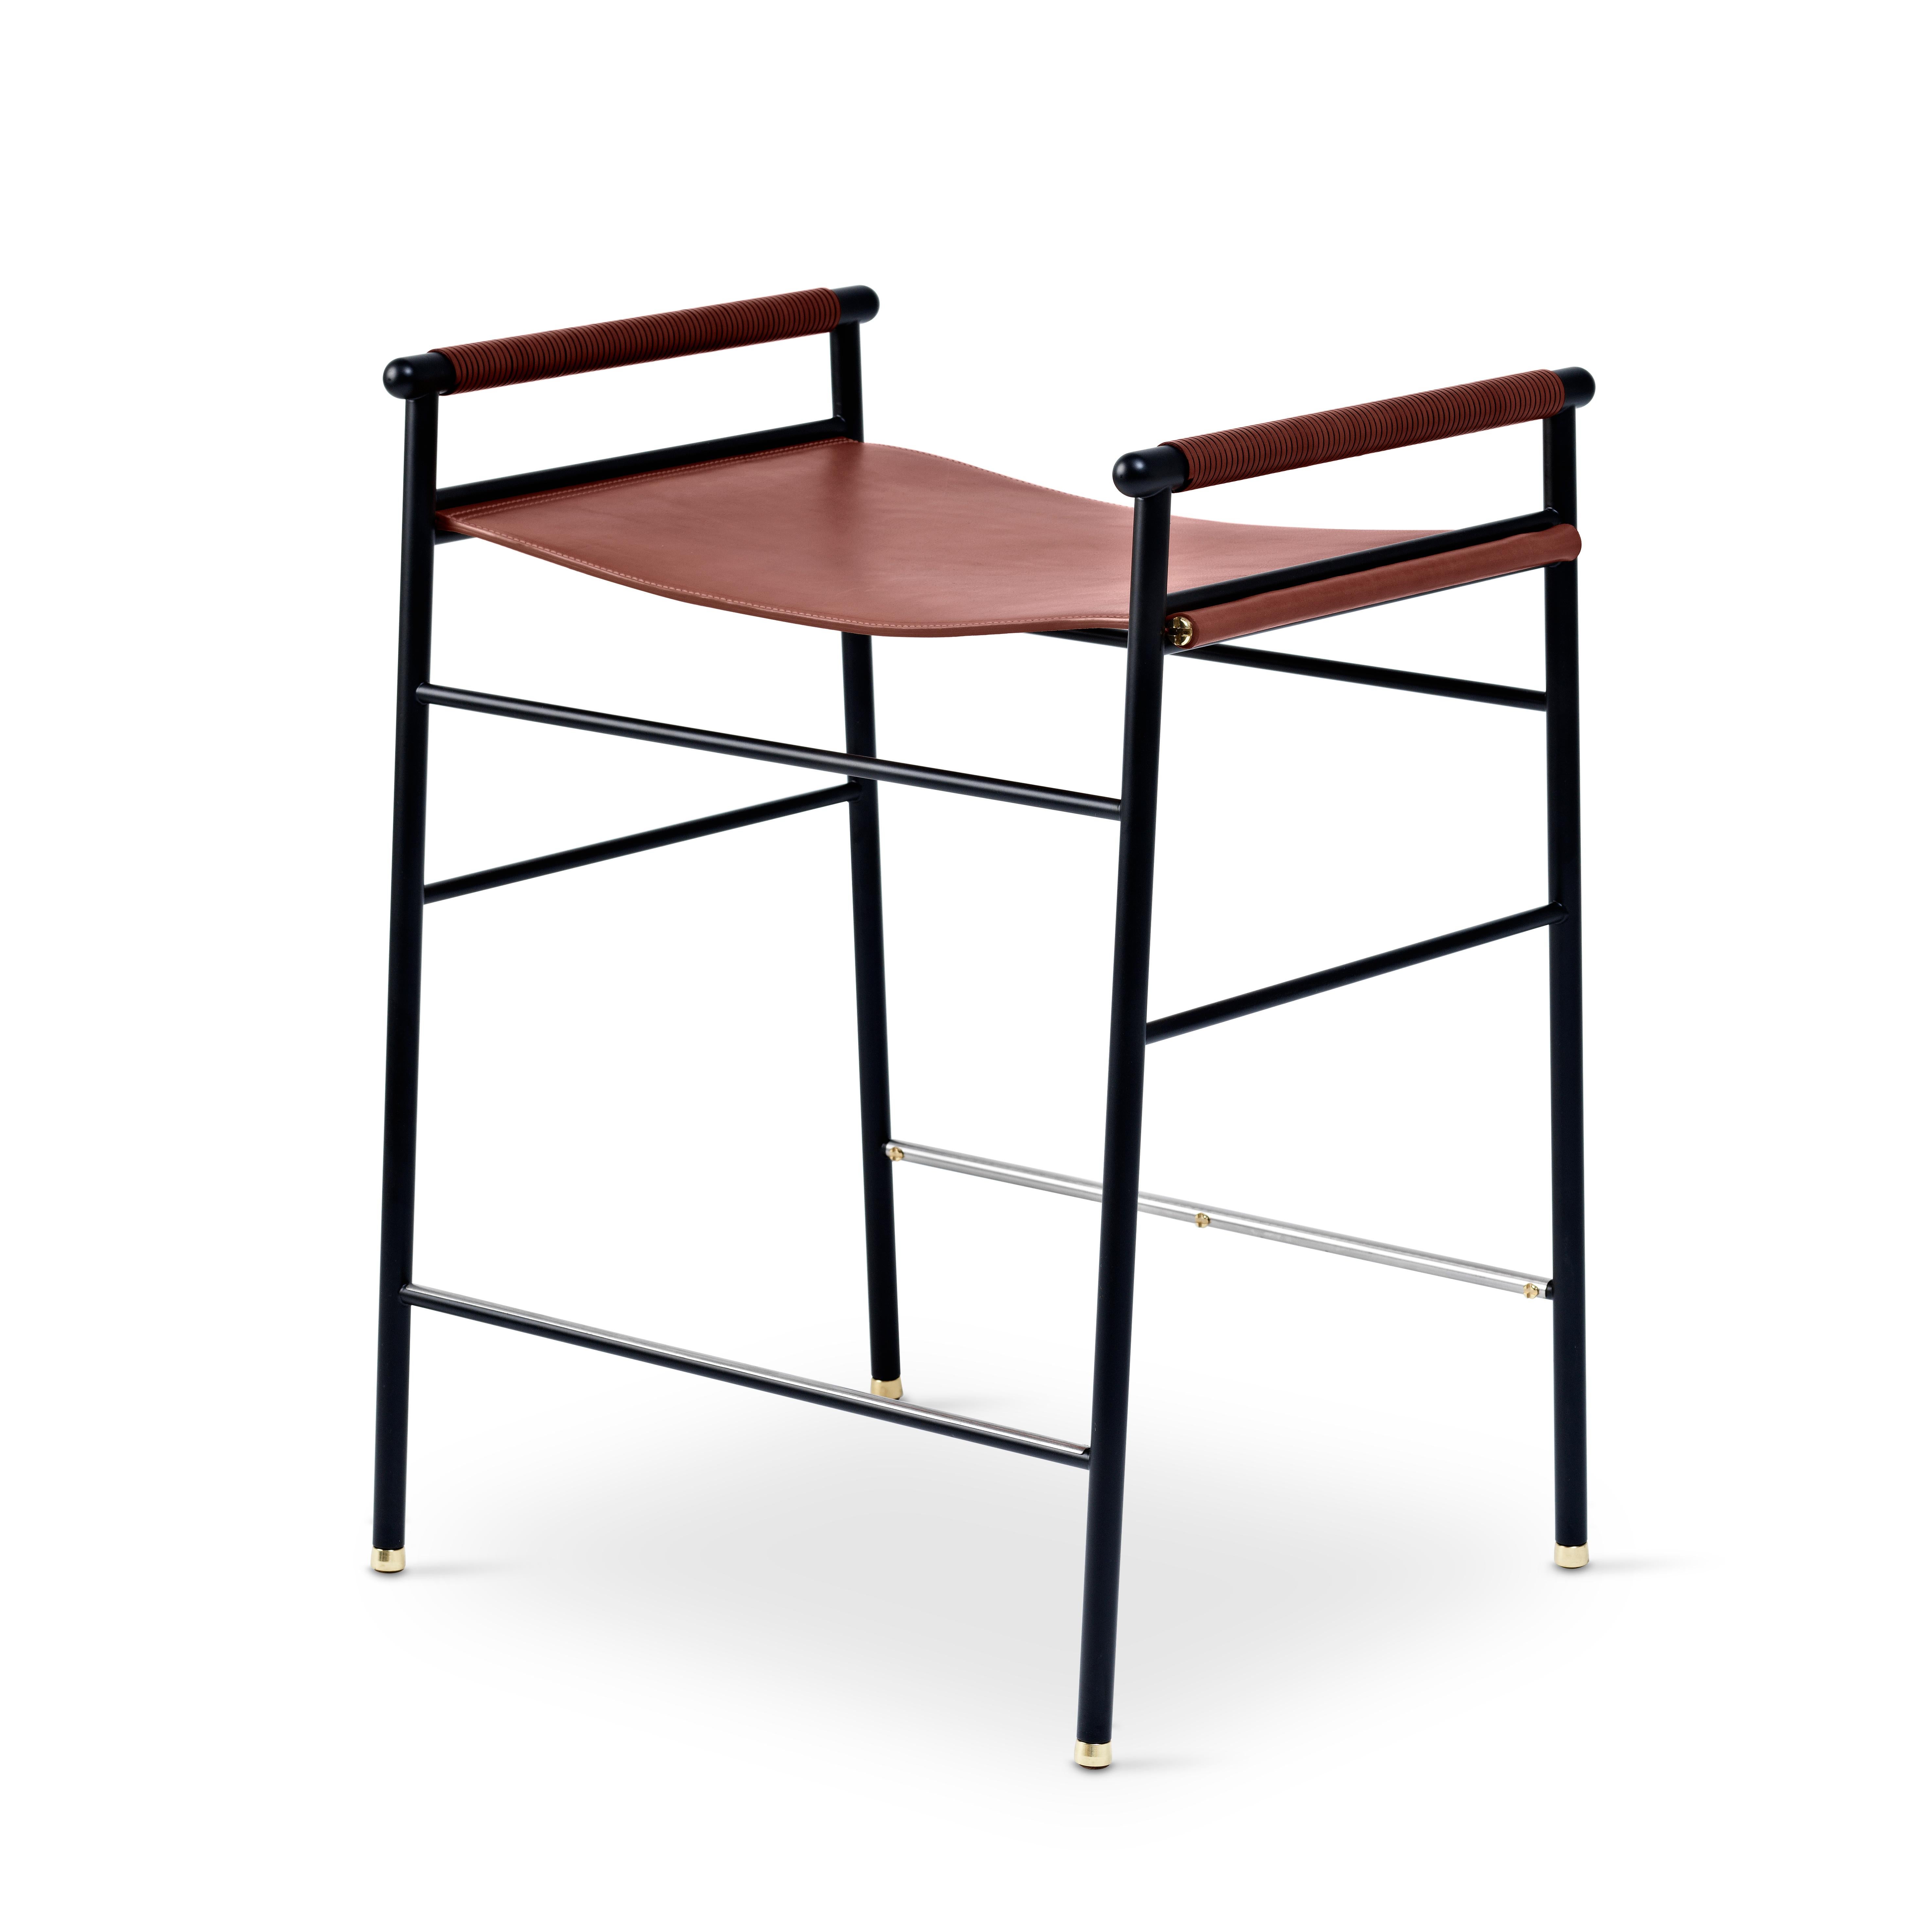 The “Repose” contemporary counter stool belongs to a collection that revisit the director chair collection, serene pieces where exclusivity and precision are shown in small details such as the hand-turned metal nuts and bolts that fix the leather